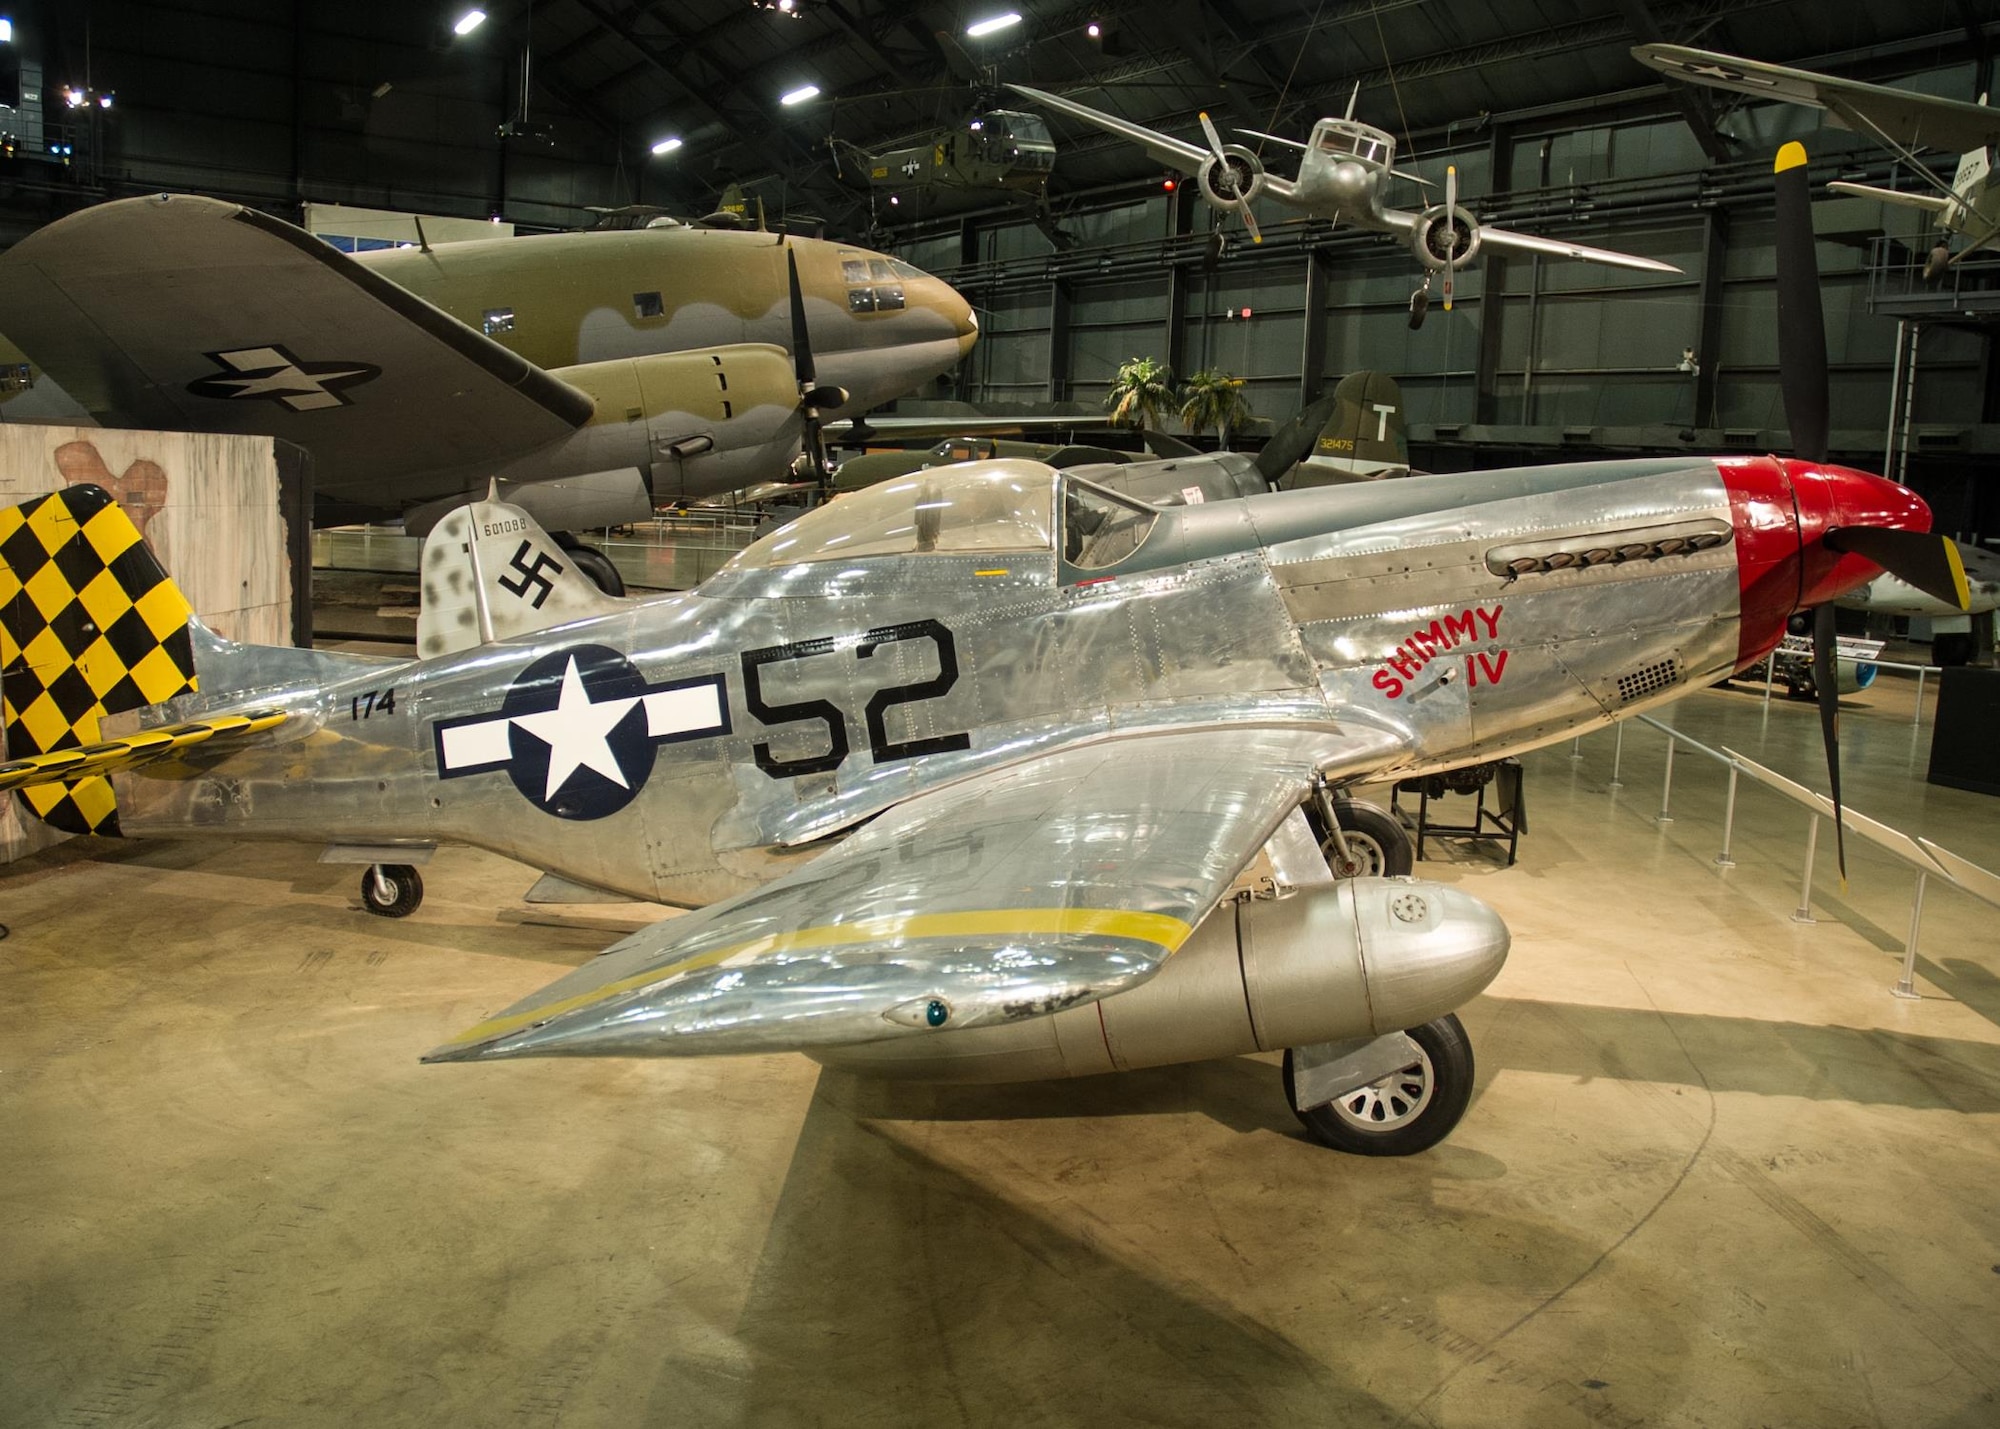 DAYTON, Ohio -- North American P-51D Mustang in the World War II Gallery at the National Museum of the United States Air Force. (U.S. Air Force photo)